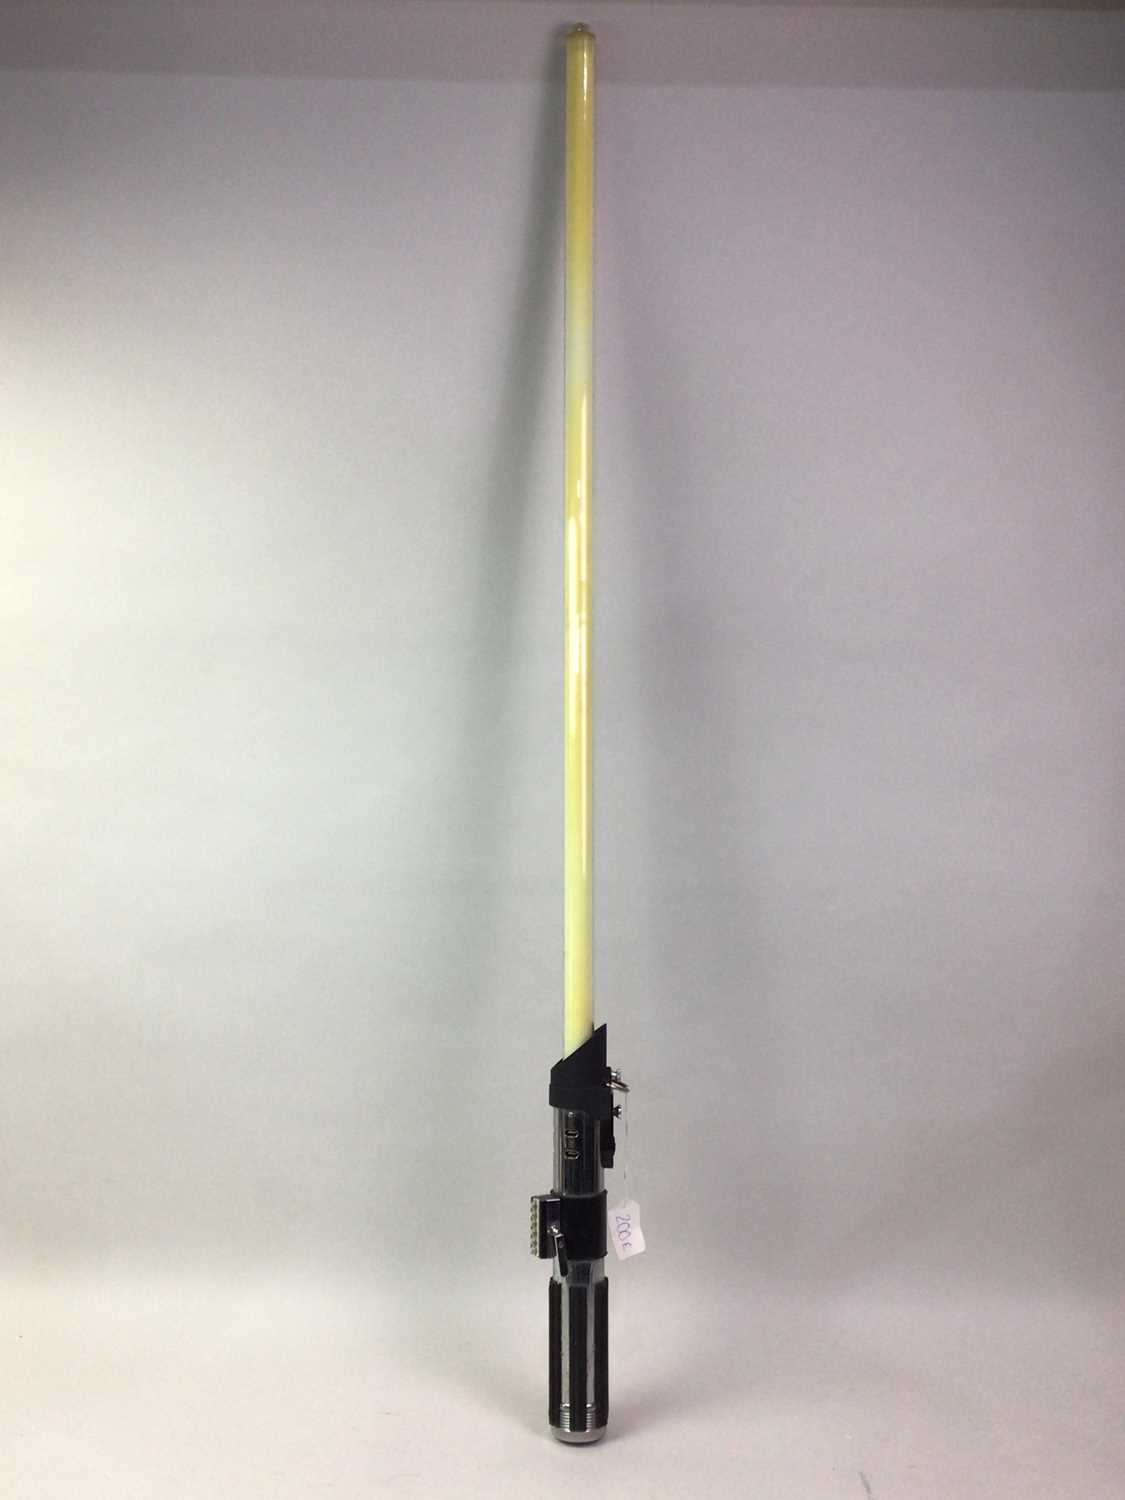 STAR WARS FORCE XF LIGHTSABER COLLECTABLE, ANAKIN SKYWALKER - Image 2 of 3